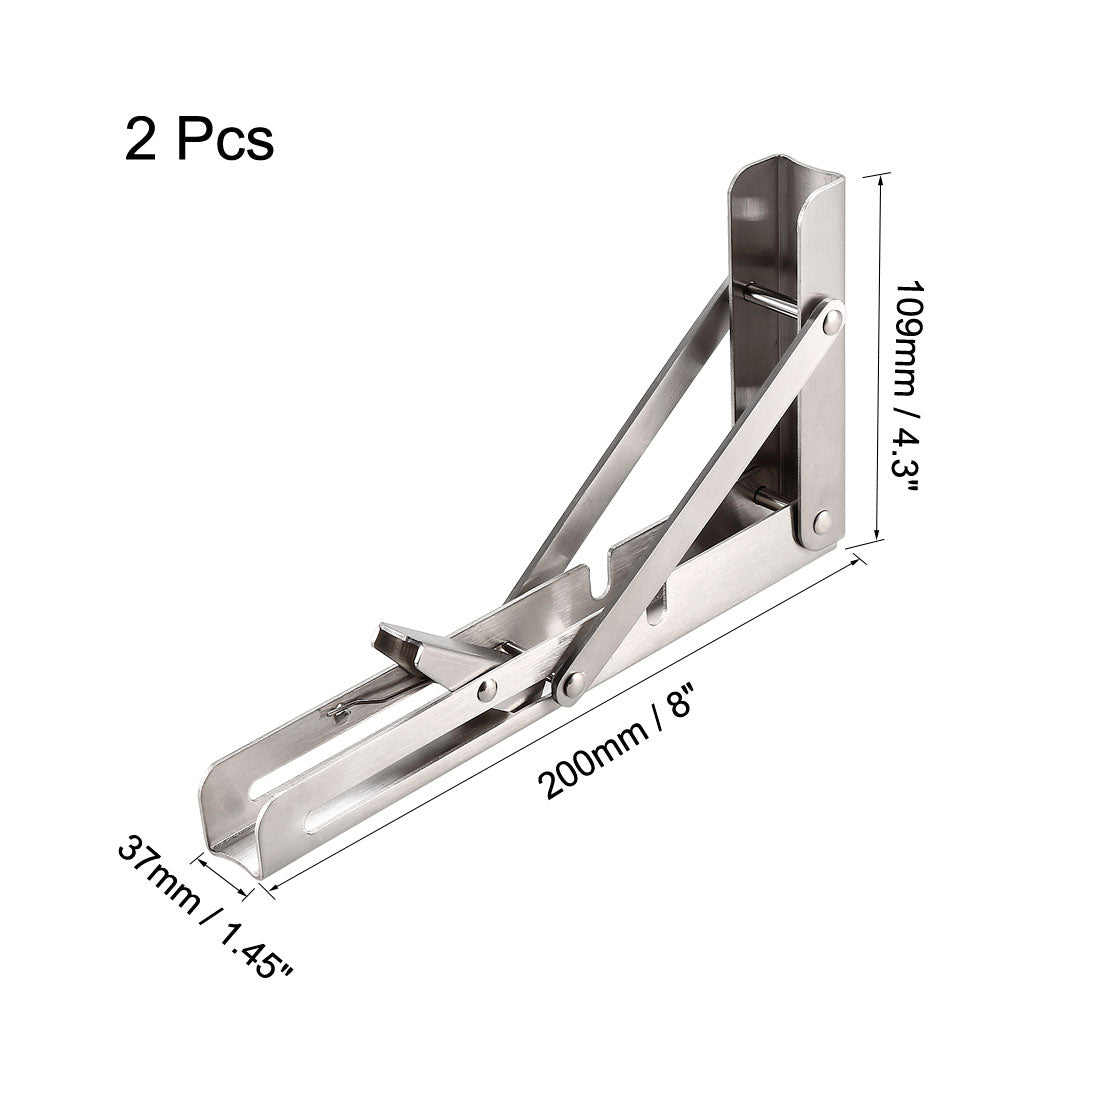 uxcell Uxcell Folding Bracket 8 inch 200mm for Shelf Table Desk Wall Mounted Support Collapsible Long Release Arm Space Saving Stainless Steel 2pcs